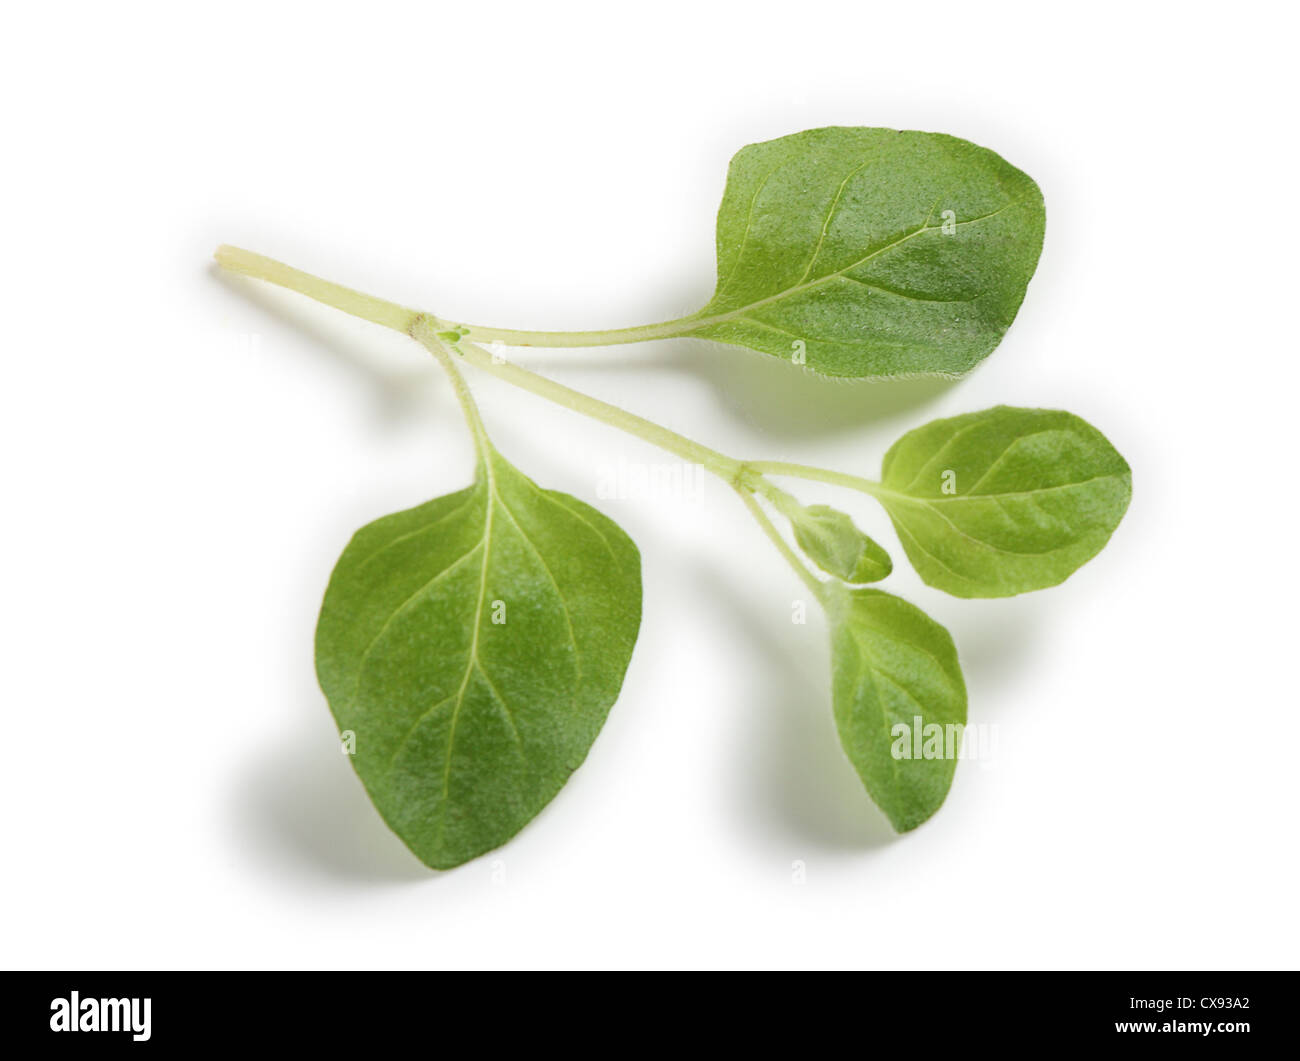 A sprig of commercially grown oregano, for use in cooking, on a white background with a shadow. Stock Photo